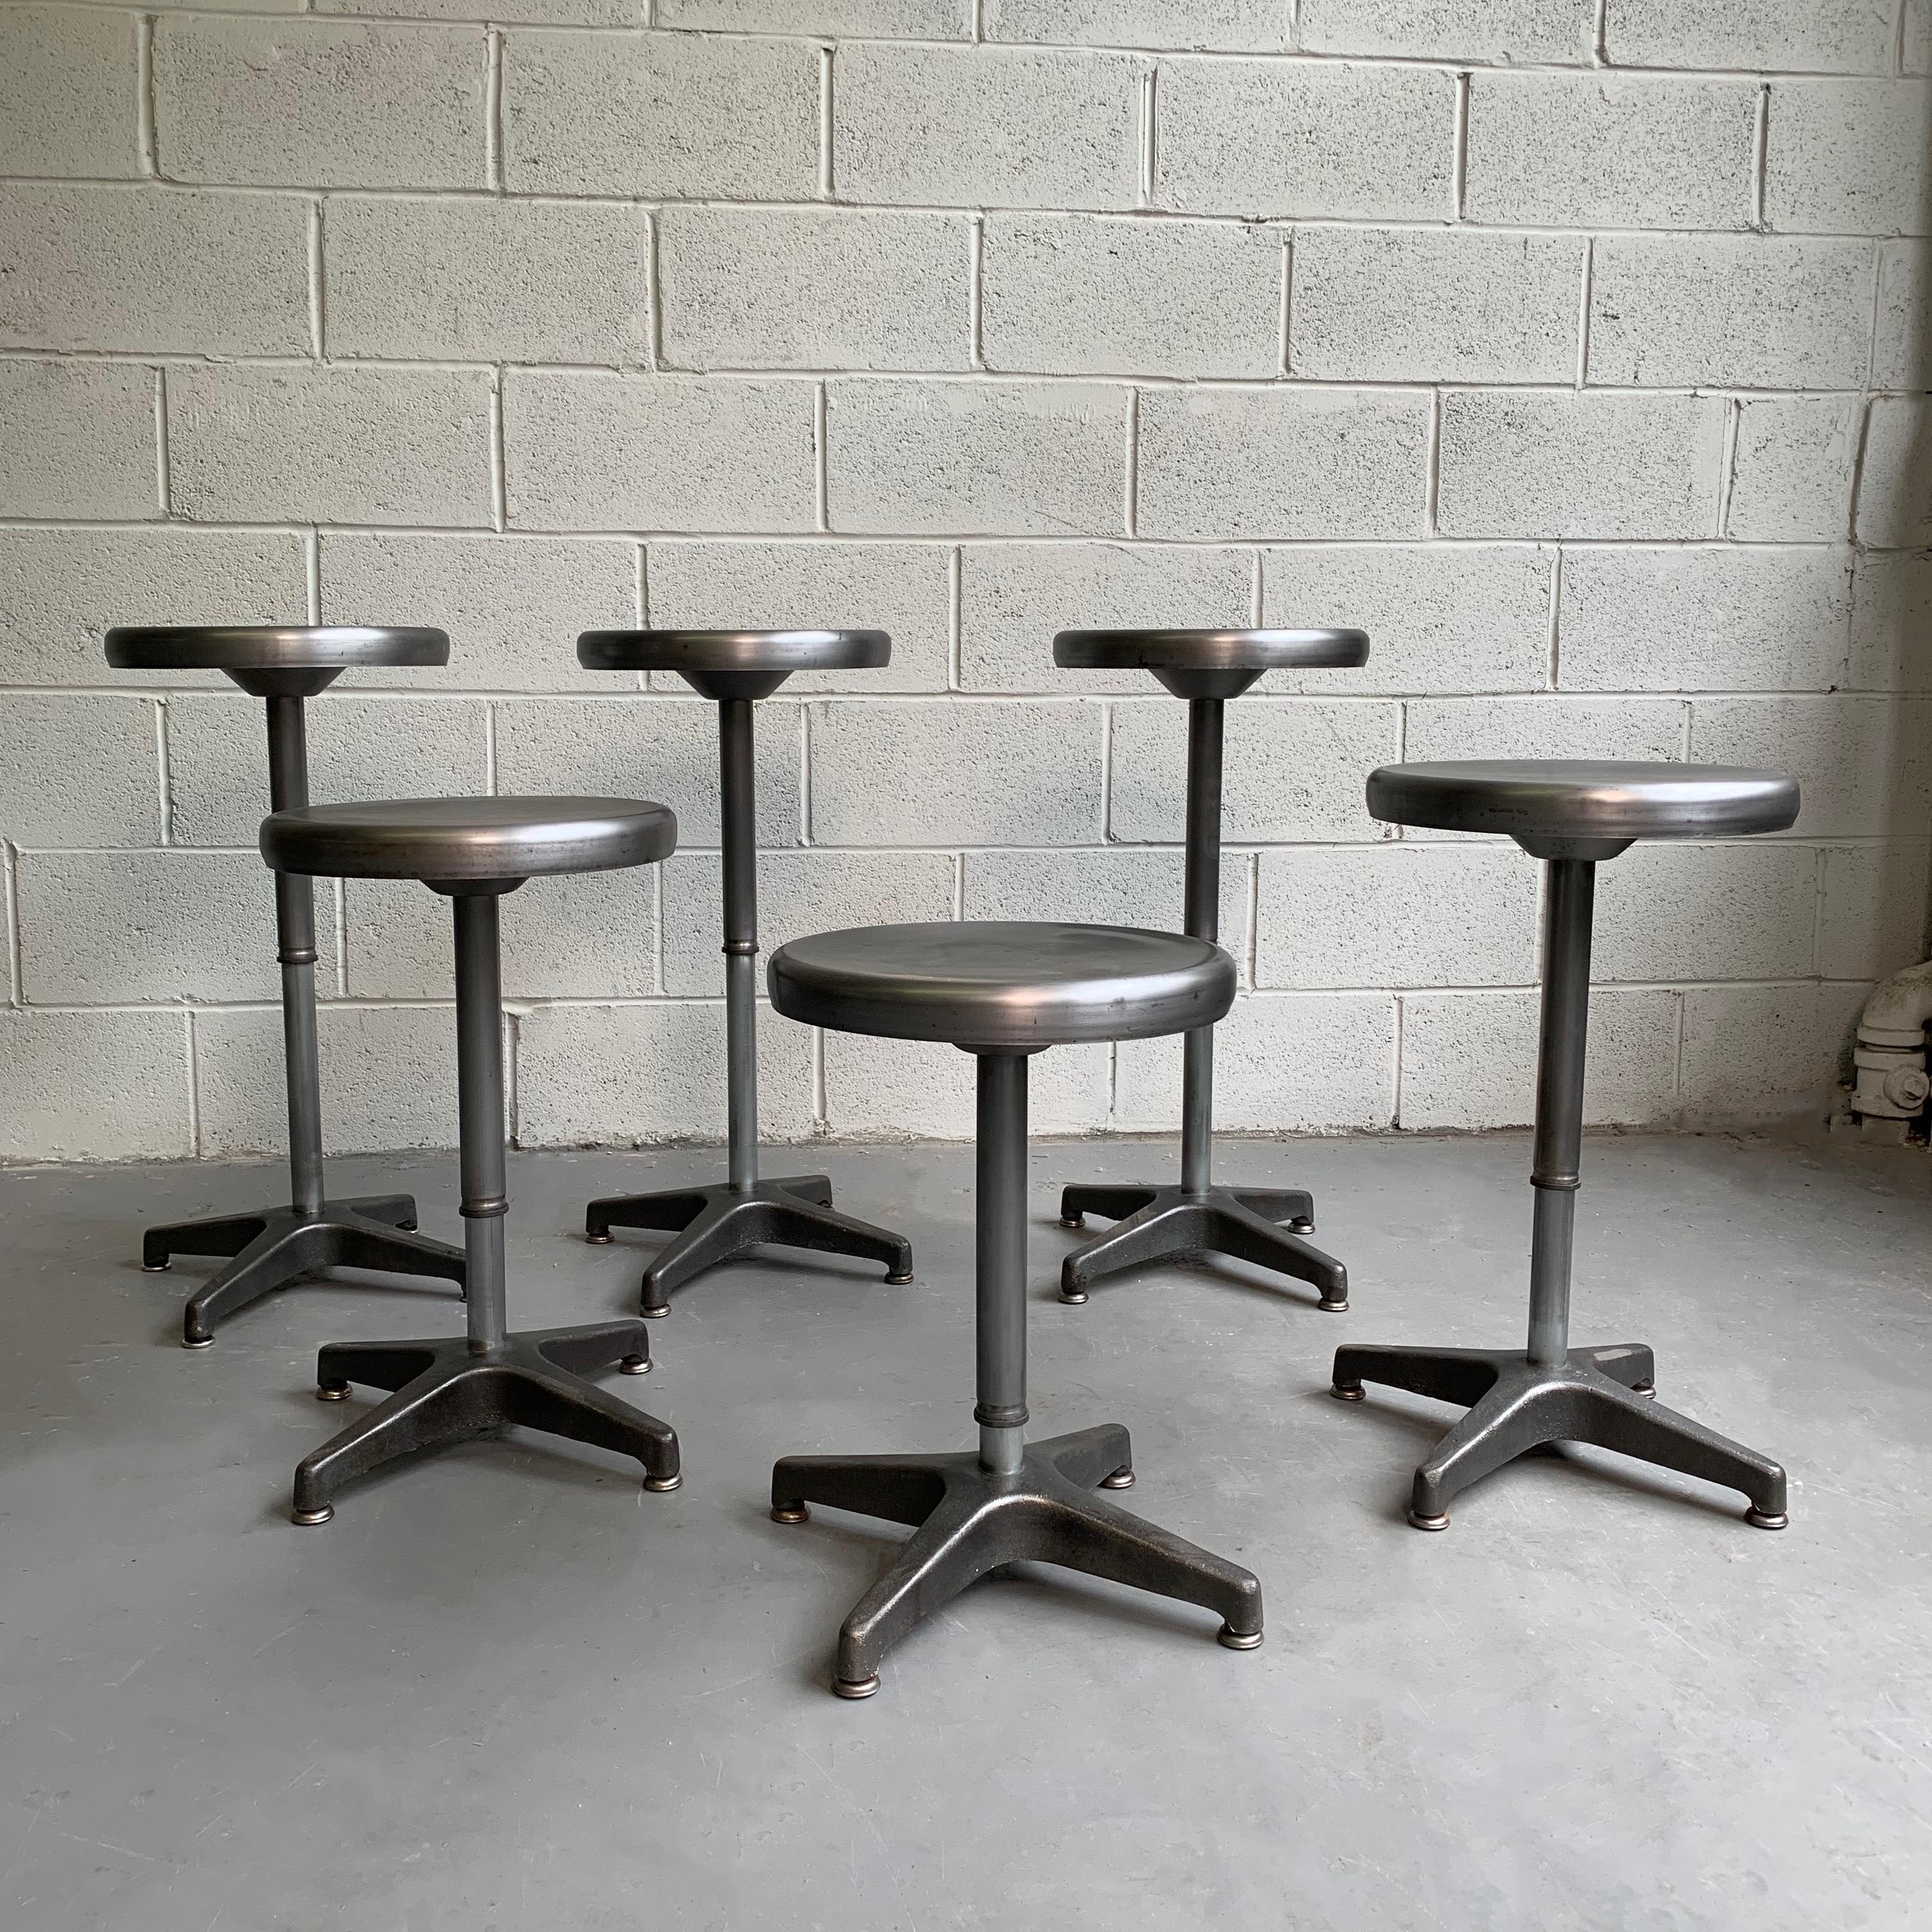 Industrial, brushed steel, swivel stools are incrementally height adjustable from dining height 18 inches to counter height 27 inches. The seat diameter is 13 inches and the foot print is 16 inches diameter. Sold individually.